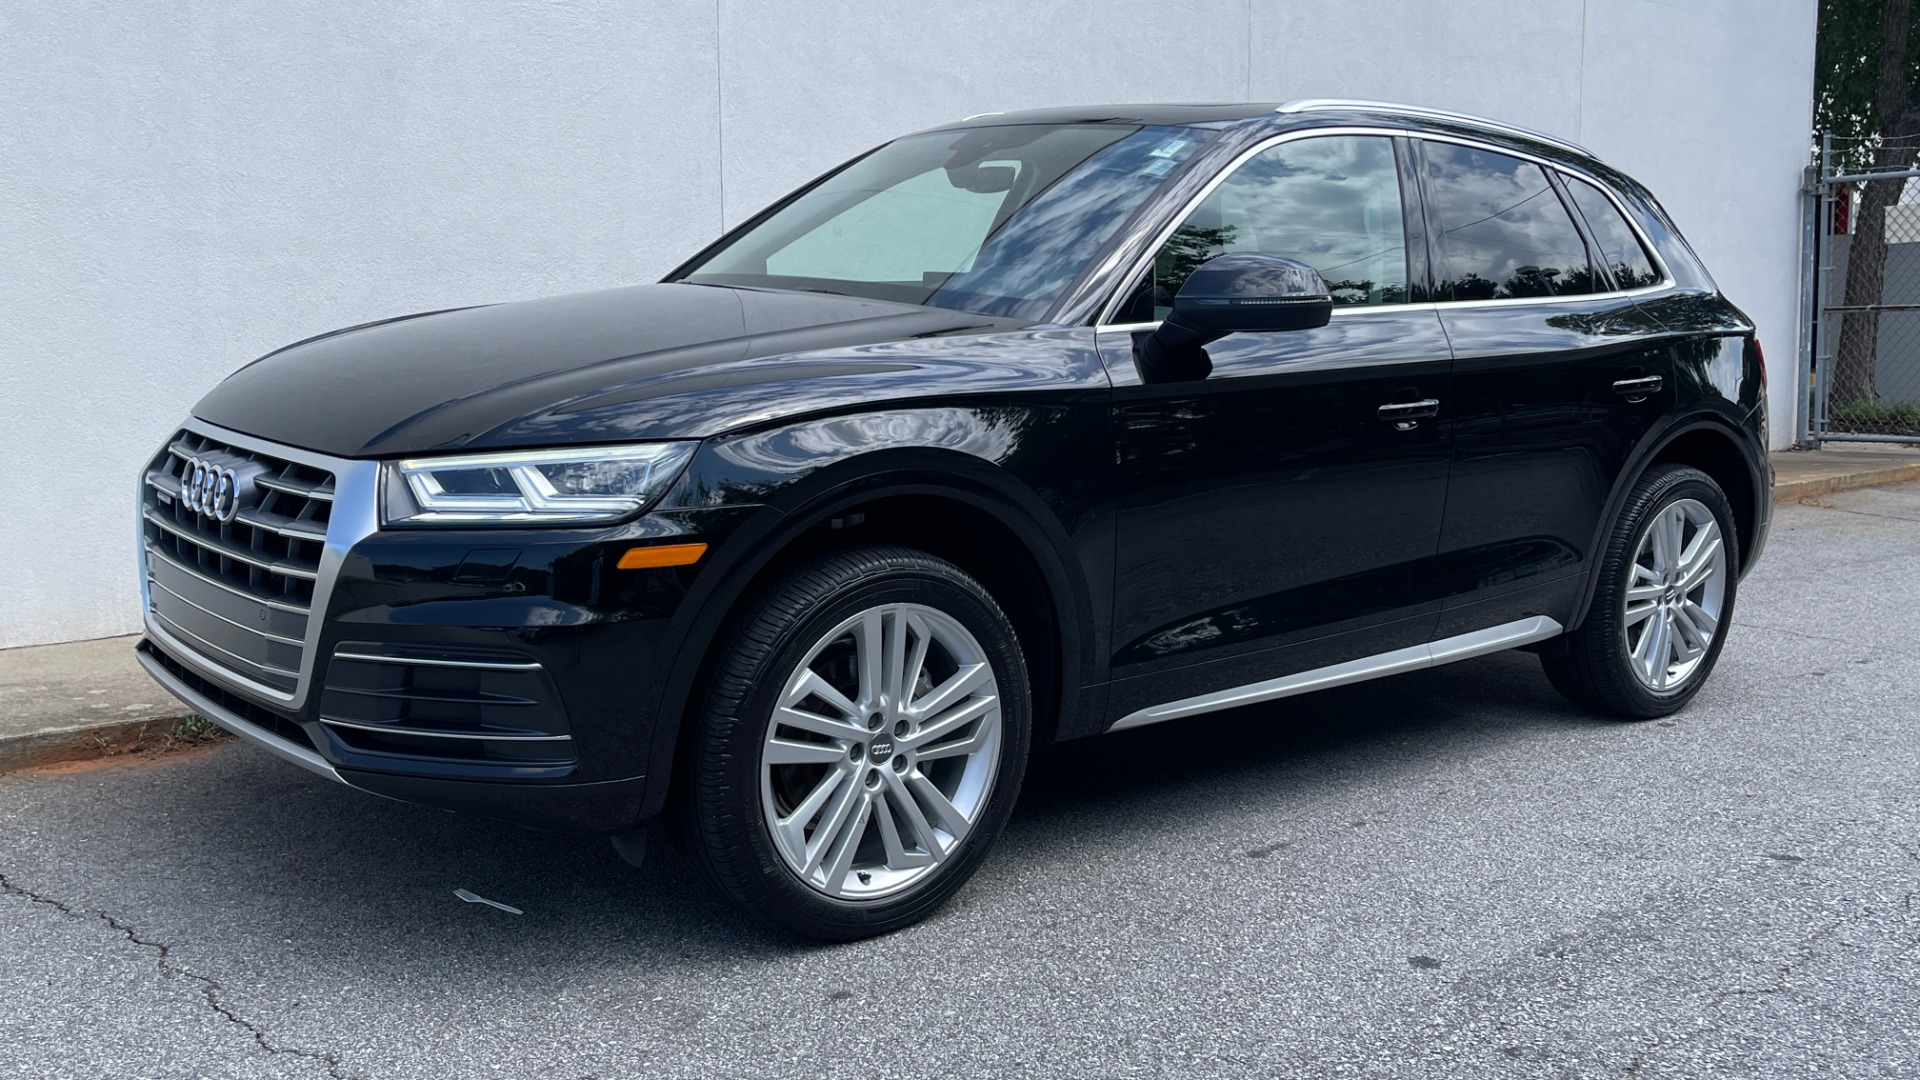 Used 2018 Audi Q5 PREMIUM PLUS / 20IN WHEELS / WARM WEATHER PACKAGE / AUDI CONNECT for sale $33,595 at Formula Imports in Charlotte NC 28227 6